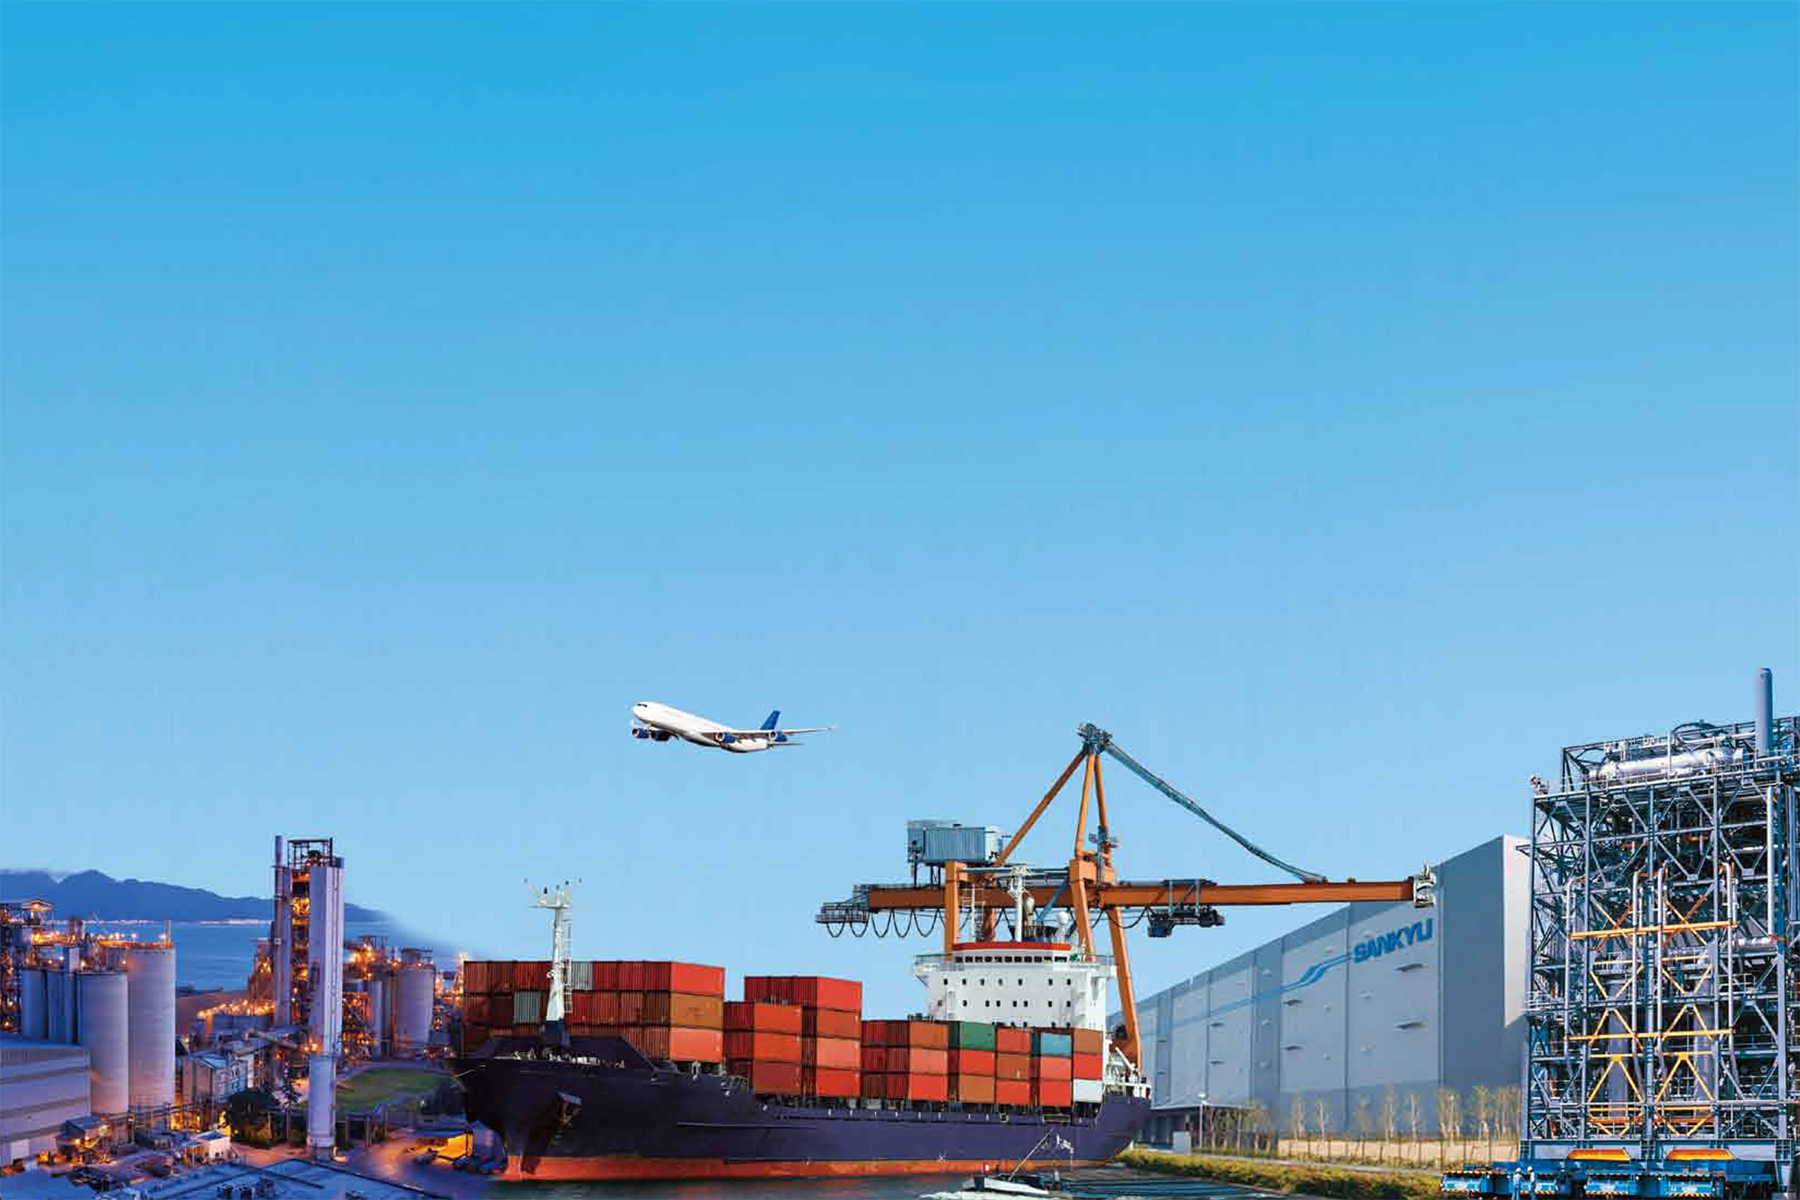 Airplane flying over cargo ship